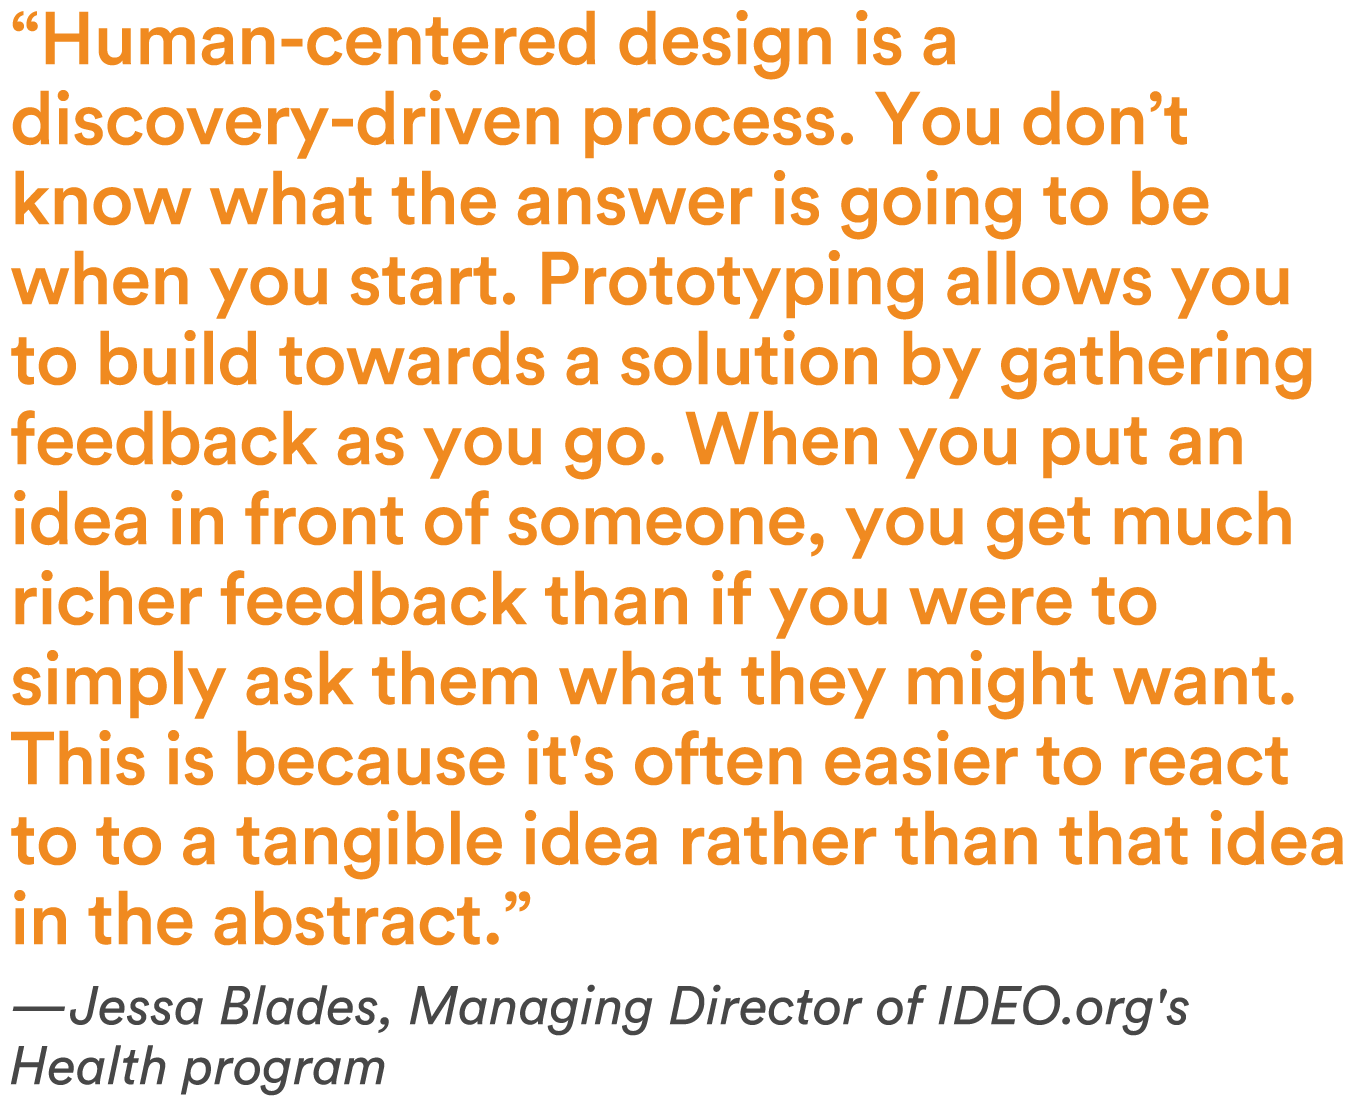 “Human-centered design is a discovery-driven process. You don’t know what the answer is going to be when you start. Prototyping allows you to build towards a solution by gathering feedback as you go. When you put an idea in front of someone, you get much richer feedback than if you were to simply ask them what they might want. This is because it's often easier to react to a tangible idea rather than that idea in the abstract’”—Jessa Blades, Managing Director of IDEO.org's Health program